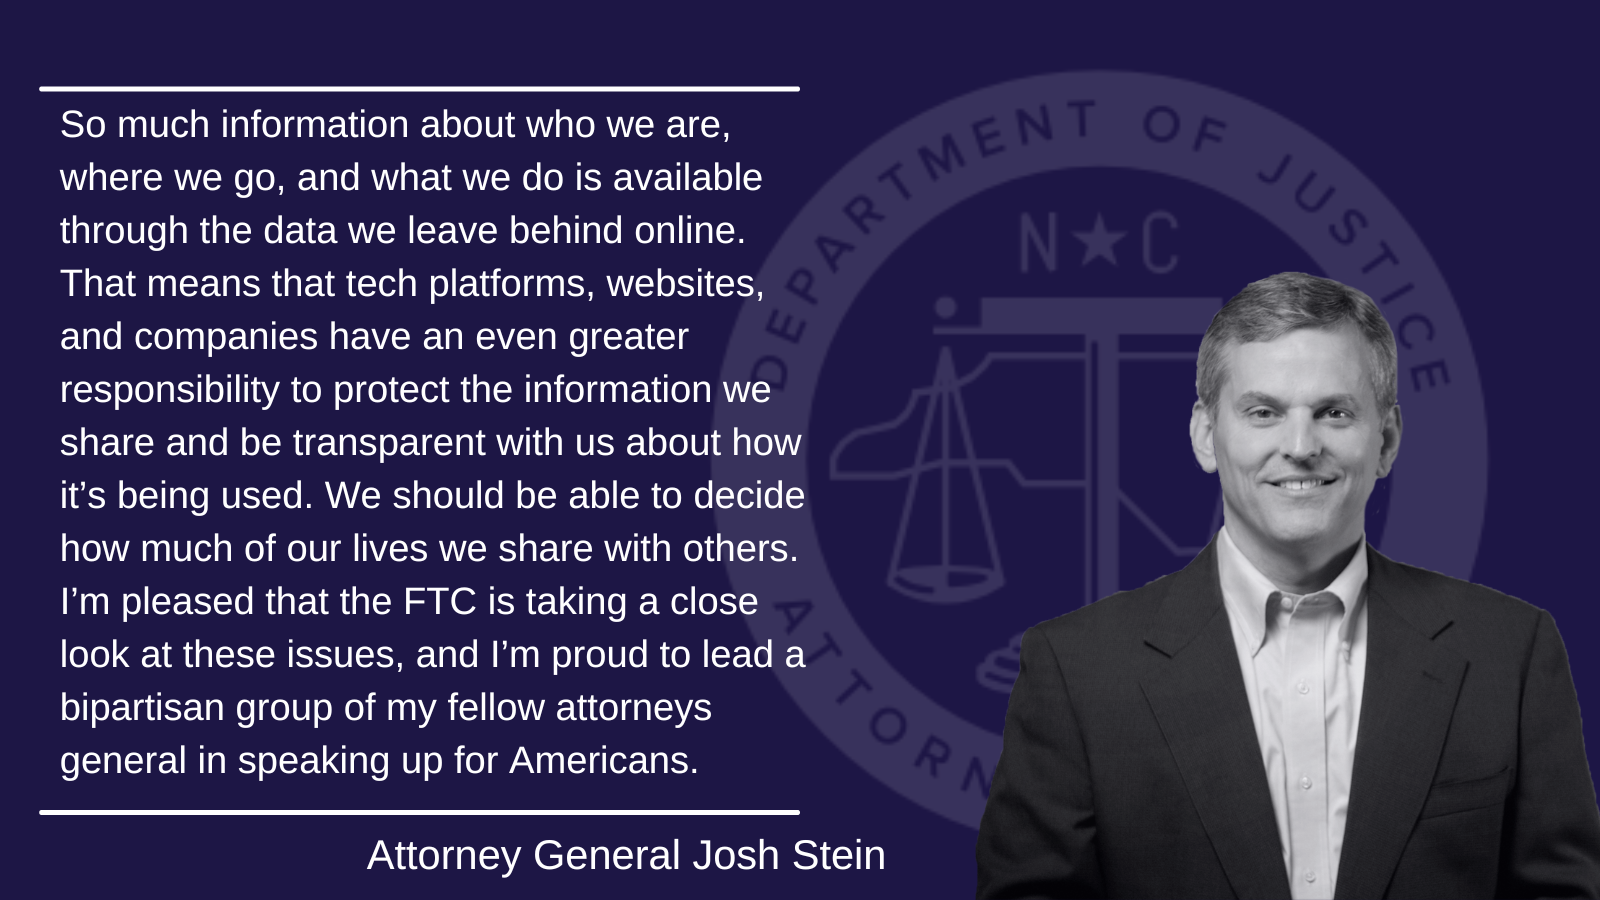  Attorney General Josh Stein Leads Bipartisan Coalition Calling for Stronger Online Data Protections 